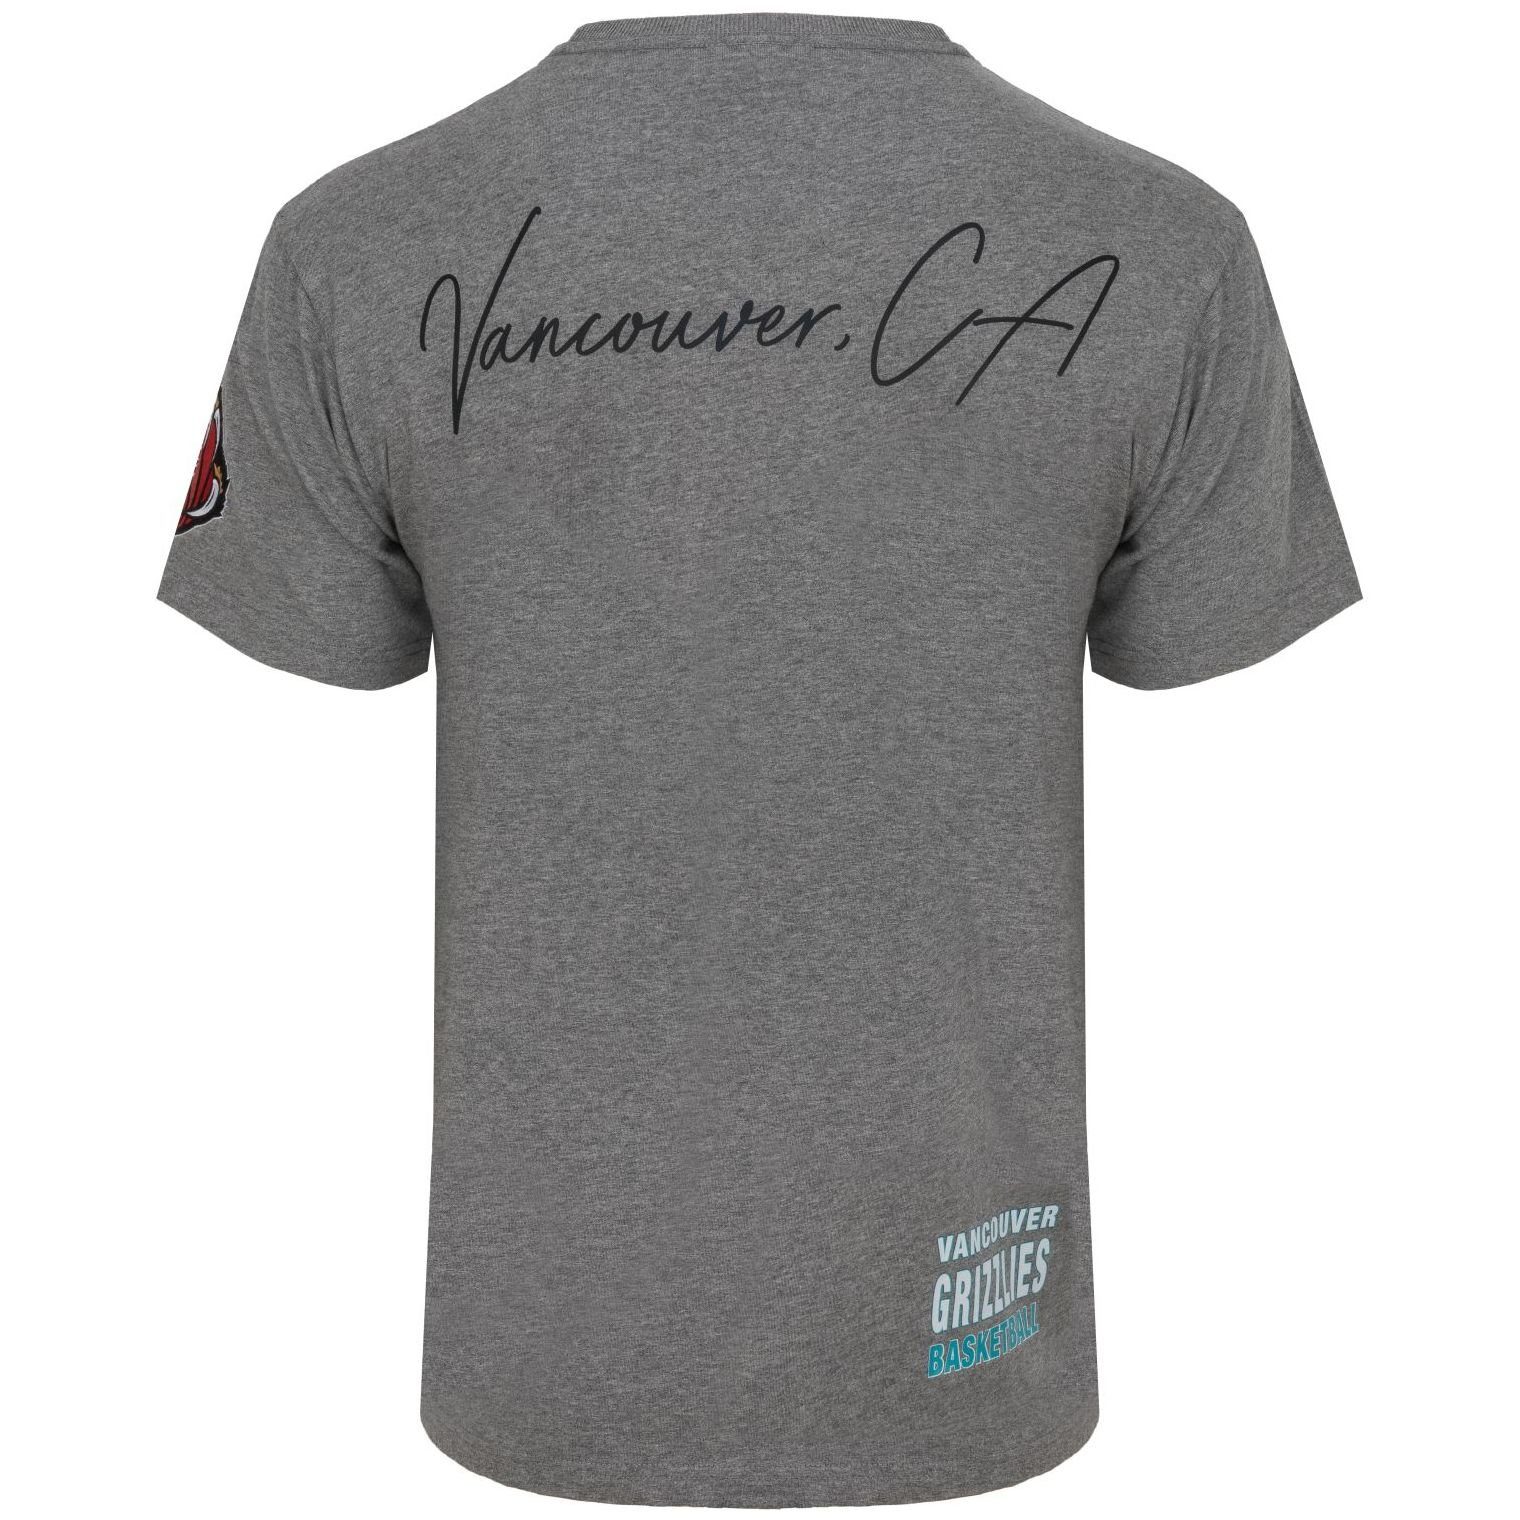 & Ness Mitchell Vancouver Print-Shirt CITY Grizzlies HOMETOWN